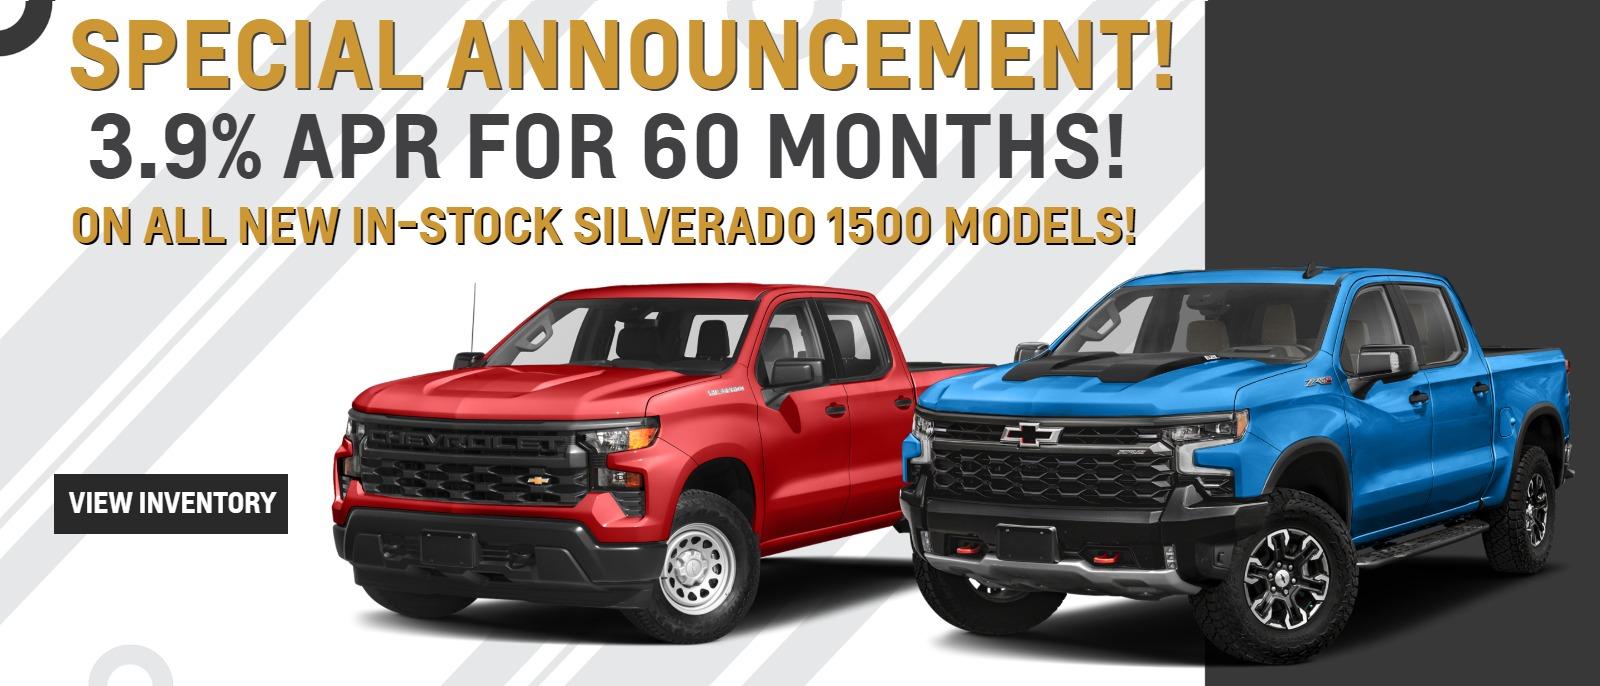 All New Silverado 1500 Models, 3.9 % A.P.R. FOR 60 MONTHS